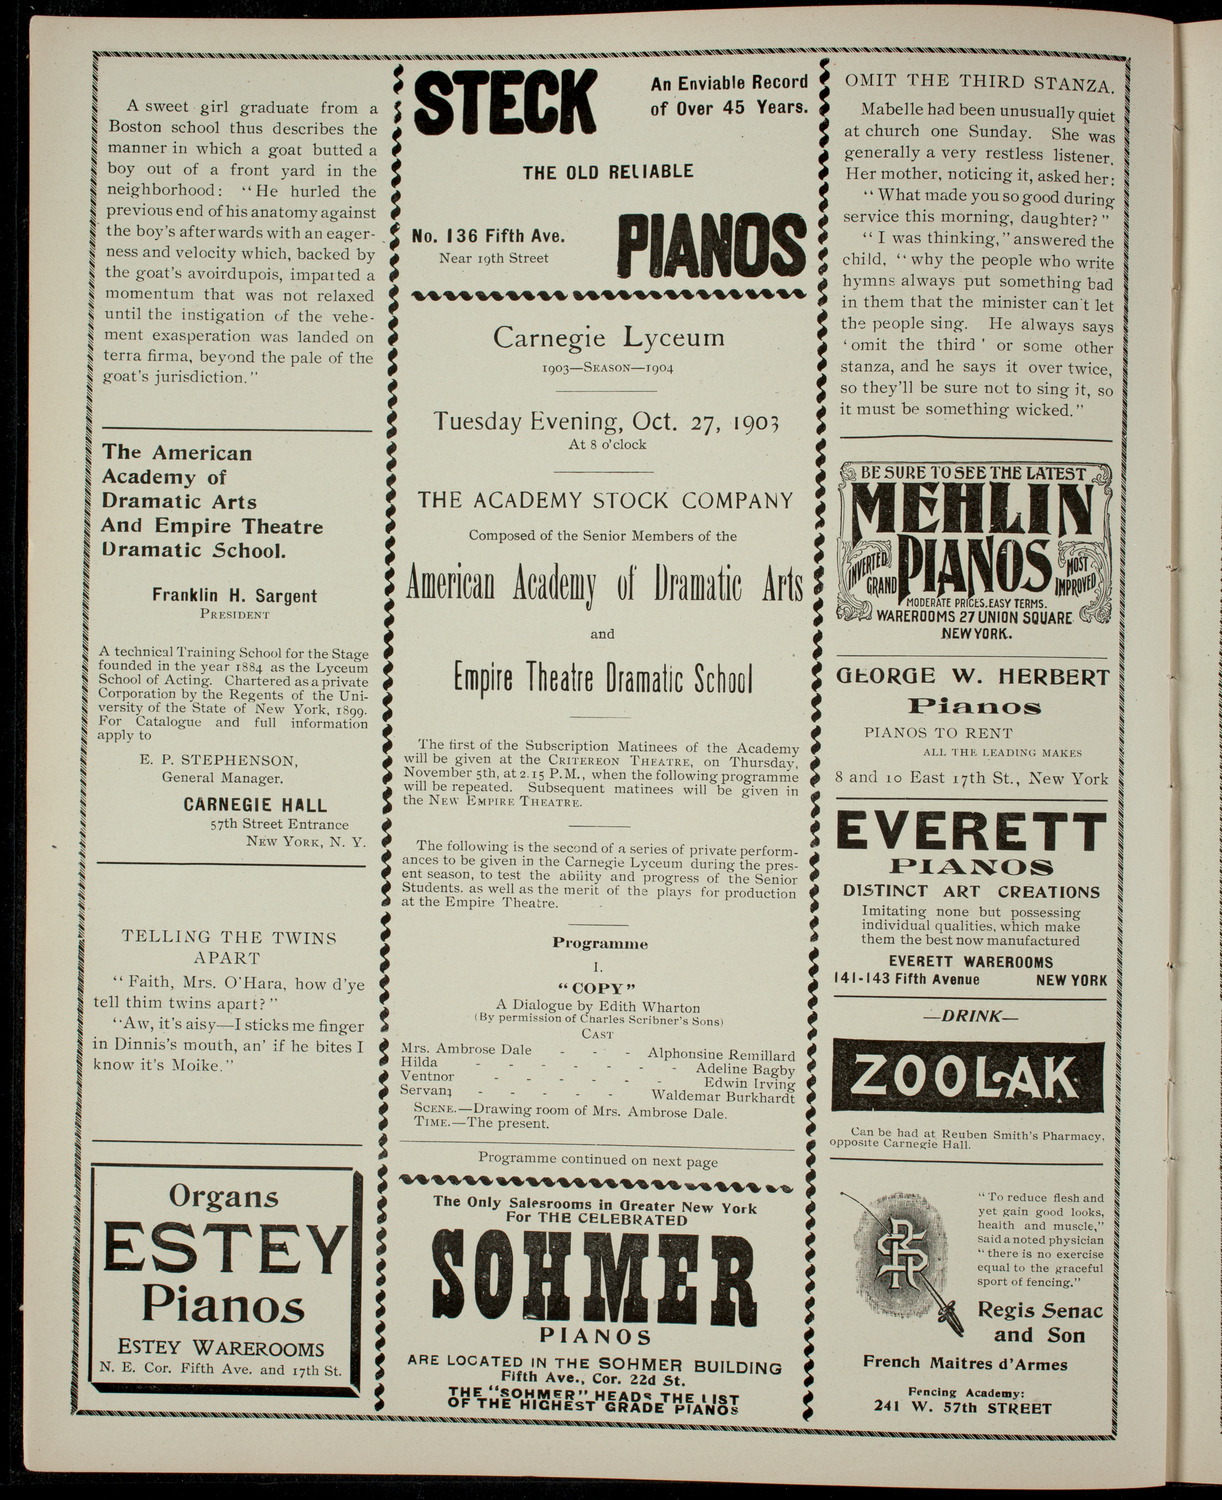 Academy Stock Company of the American Academy of Dramatic Arts/ Empire Theatre Dramatic School, October 27, 1903, program page 2